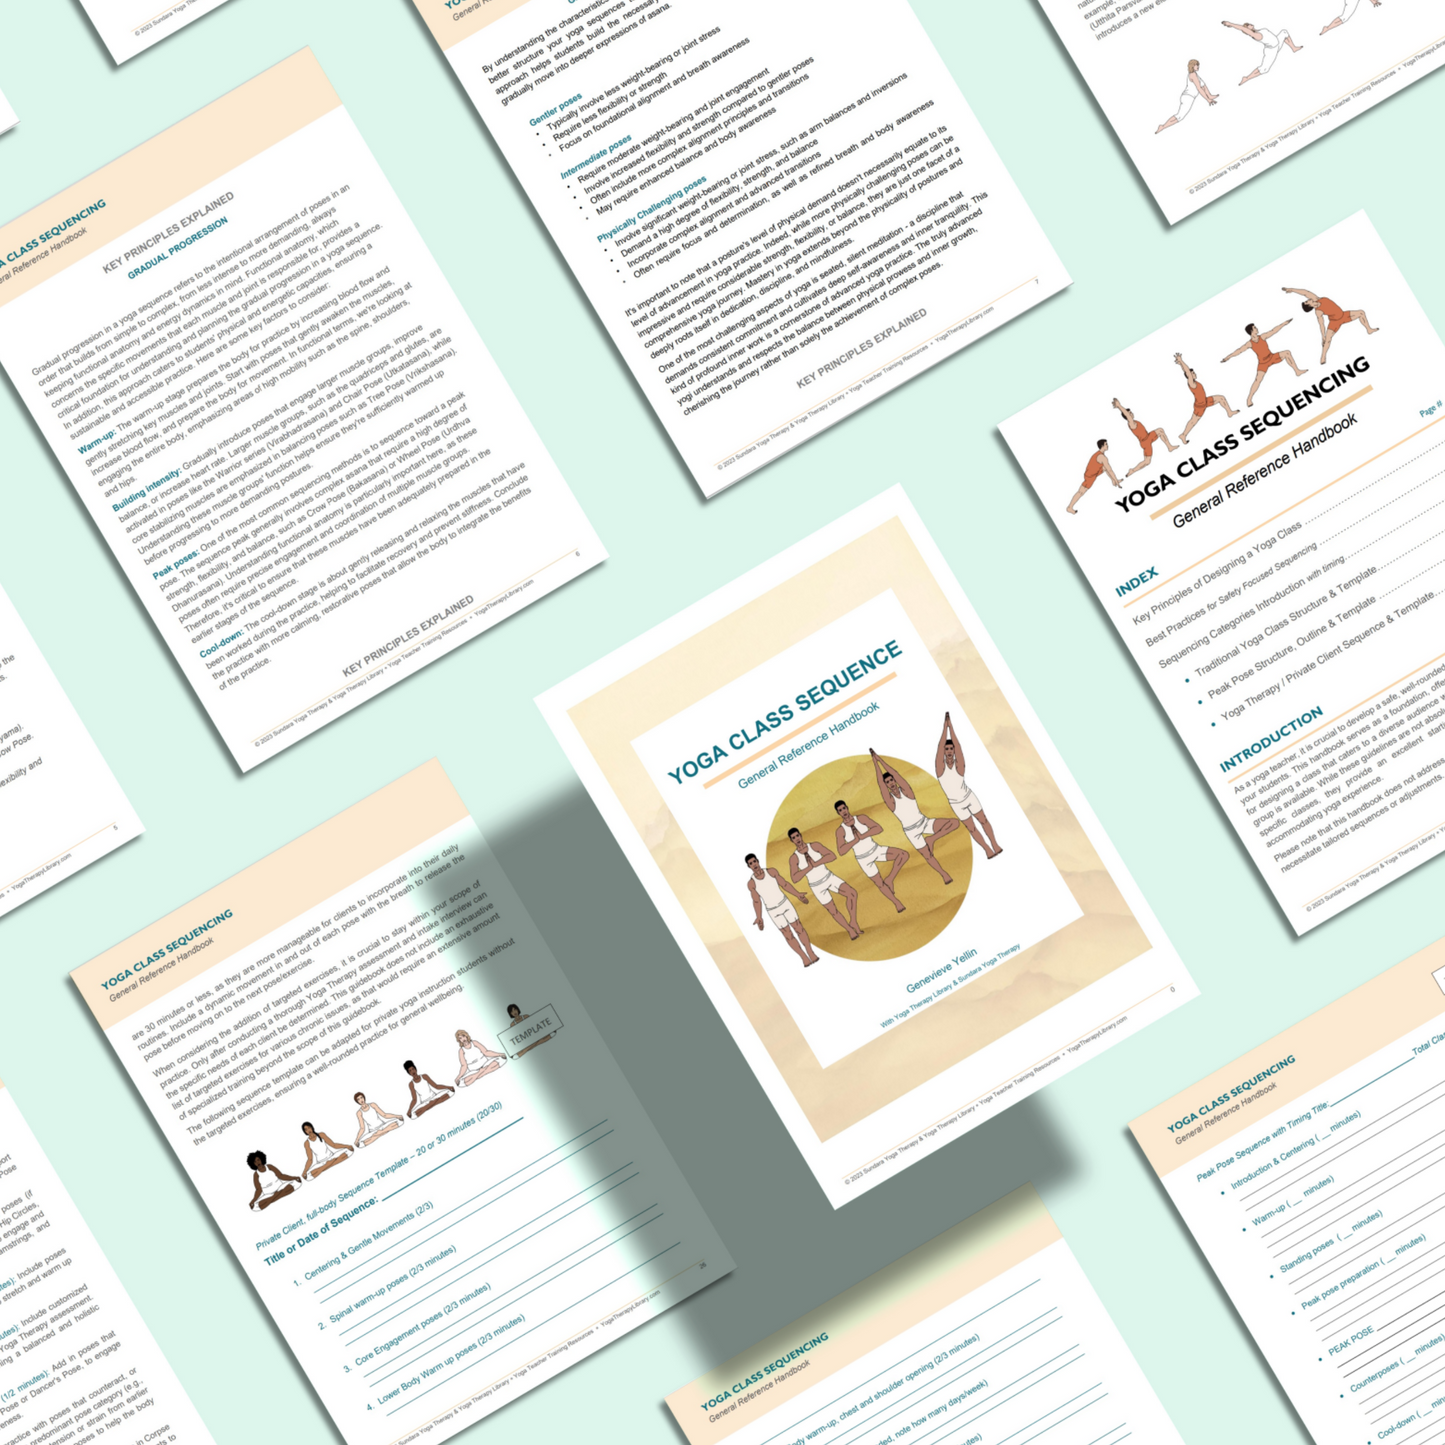 Yoga Class Sequencing: A General Reference Handbook - Digital Download